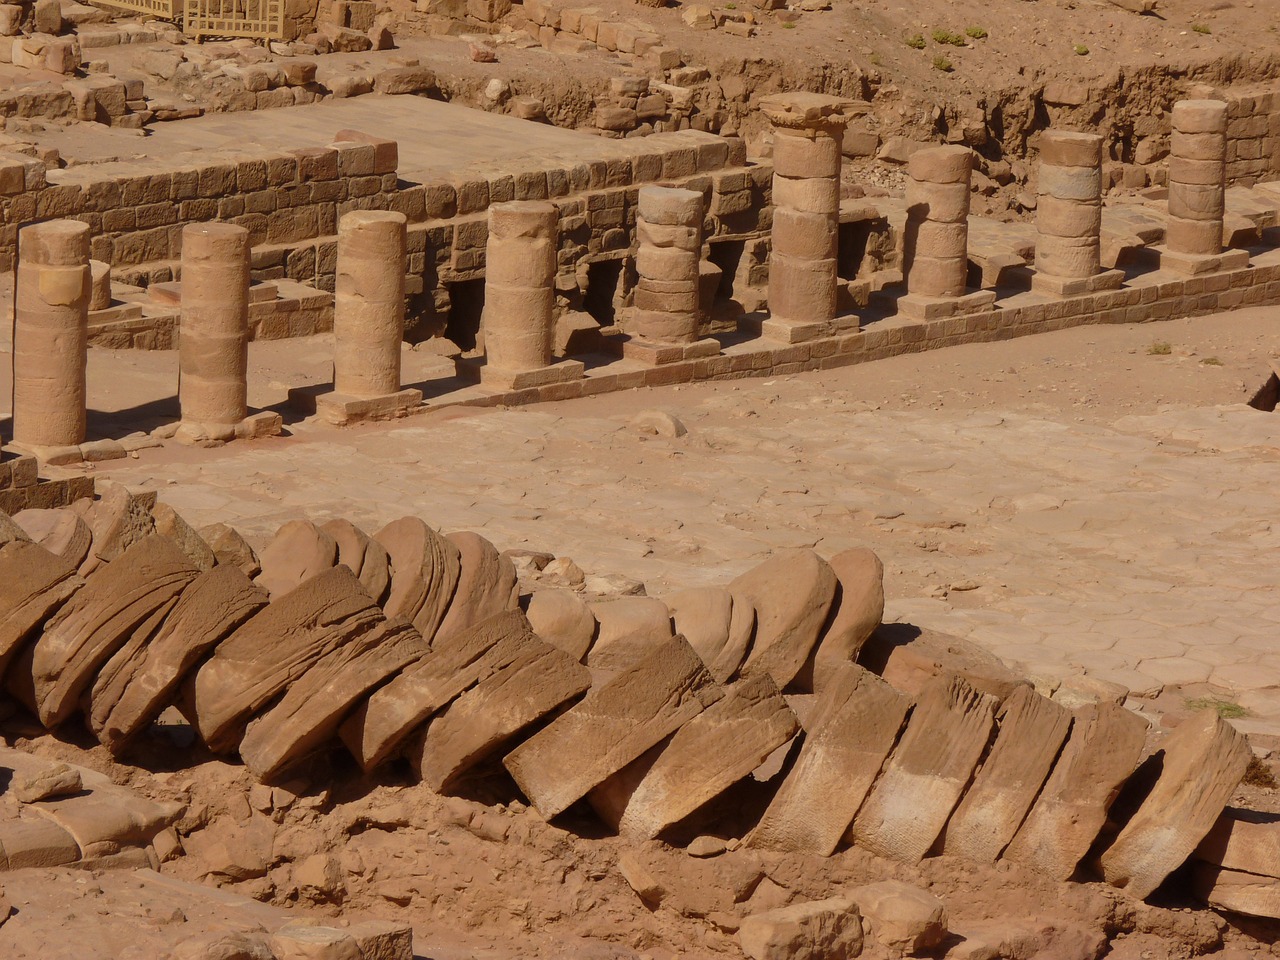 a pile of rocks sitting on top of a dirt field, egyptian art, flickr, roman columns, rows of canteen in background, red sandstone natural sculptures, stepping on towers